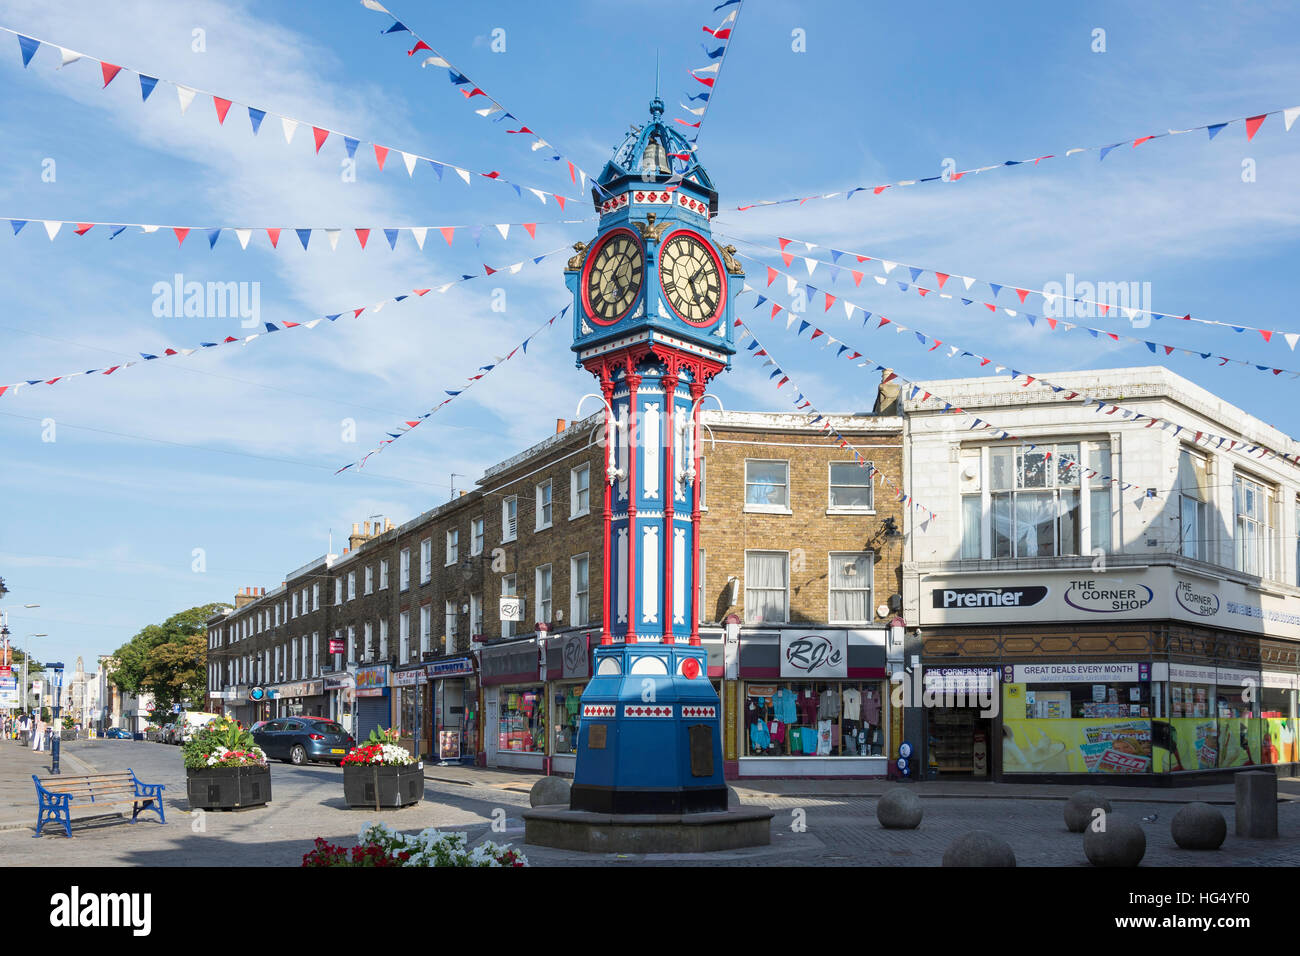 Sheerness Clock Tower, High Street, Sheerness, Isle of Sheppey, Kent, England, United Kingdom Stock Photo